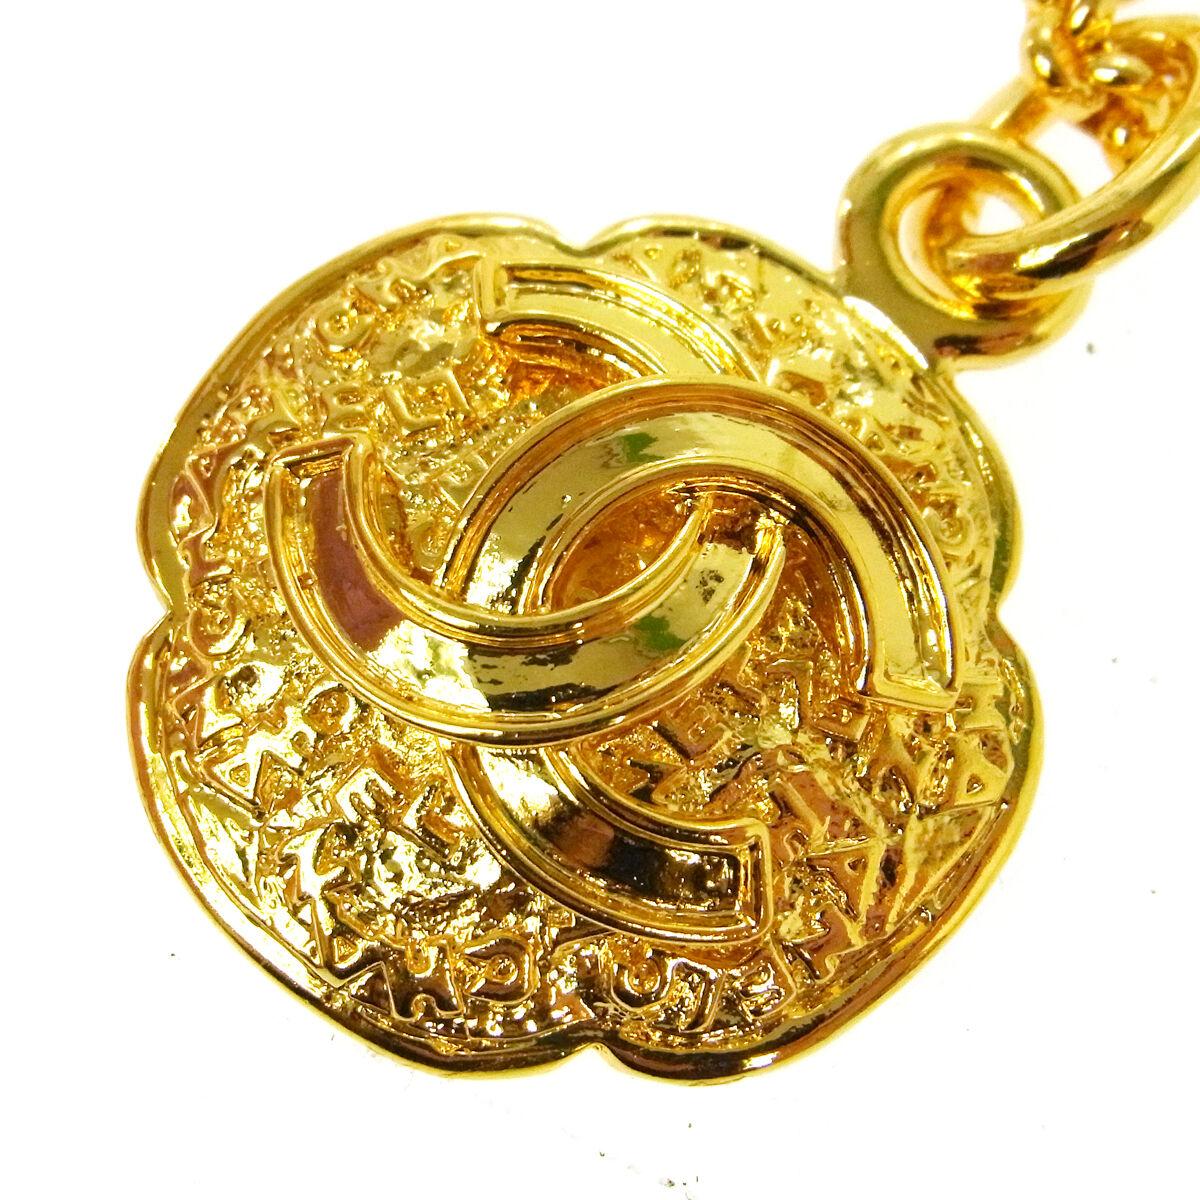 Metal
Gold tone hardware
Toggle closure
Made in France
Charm diameter 1.5